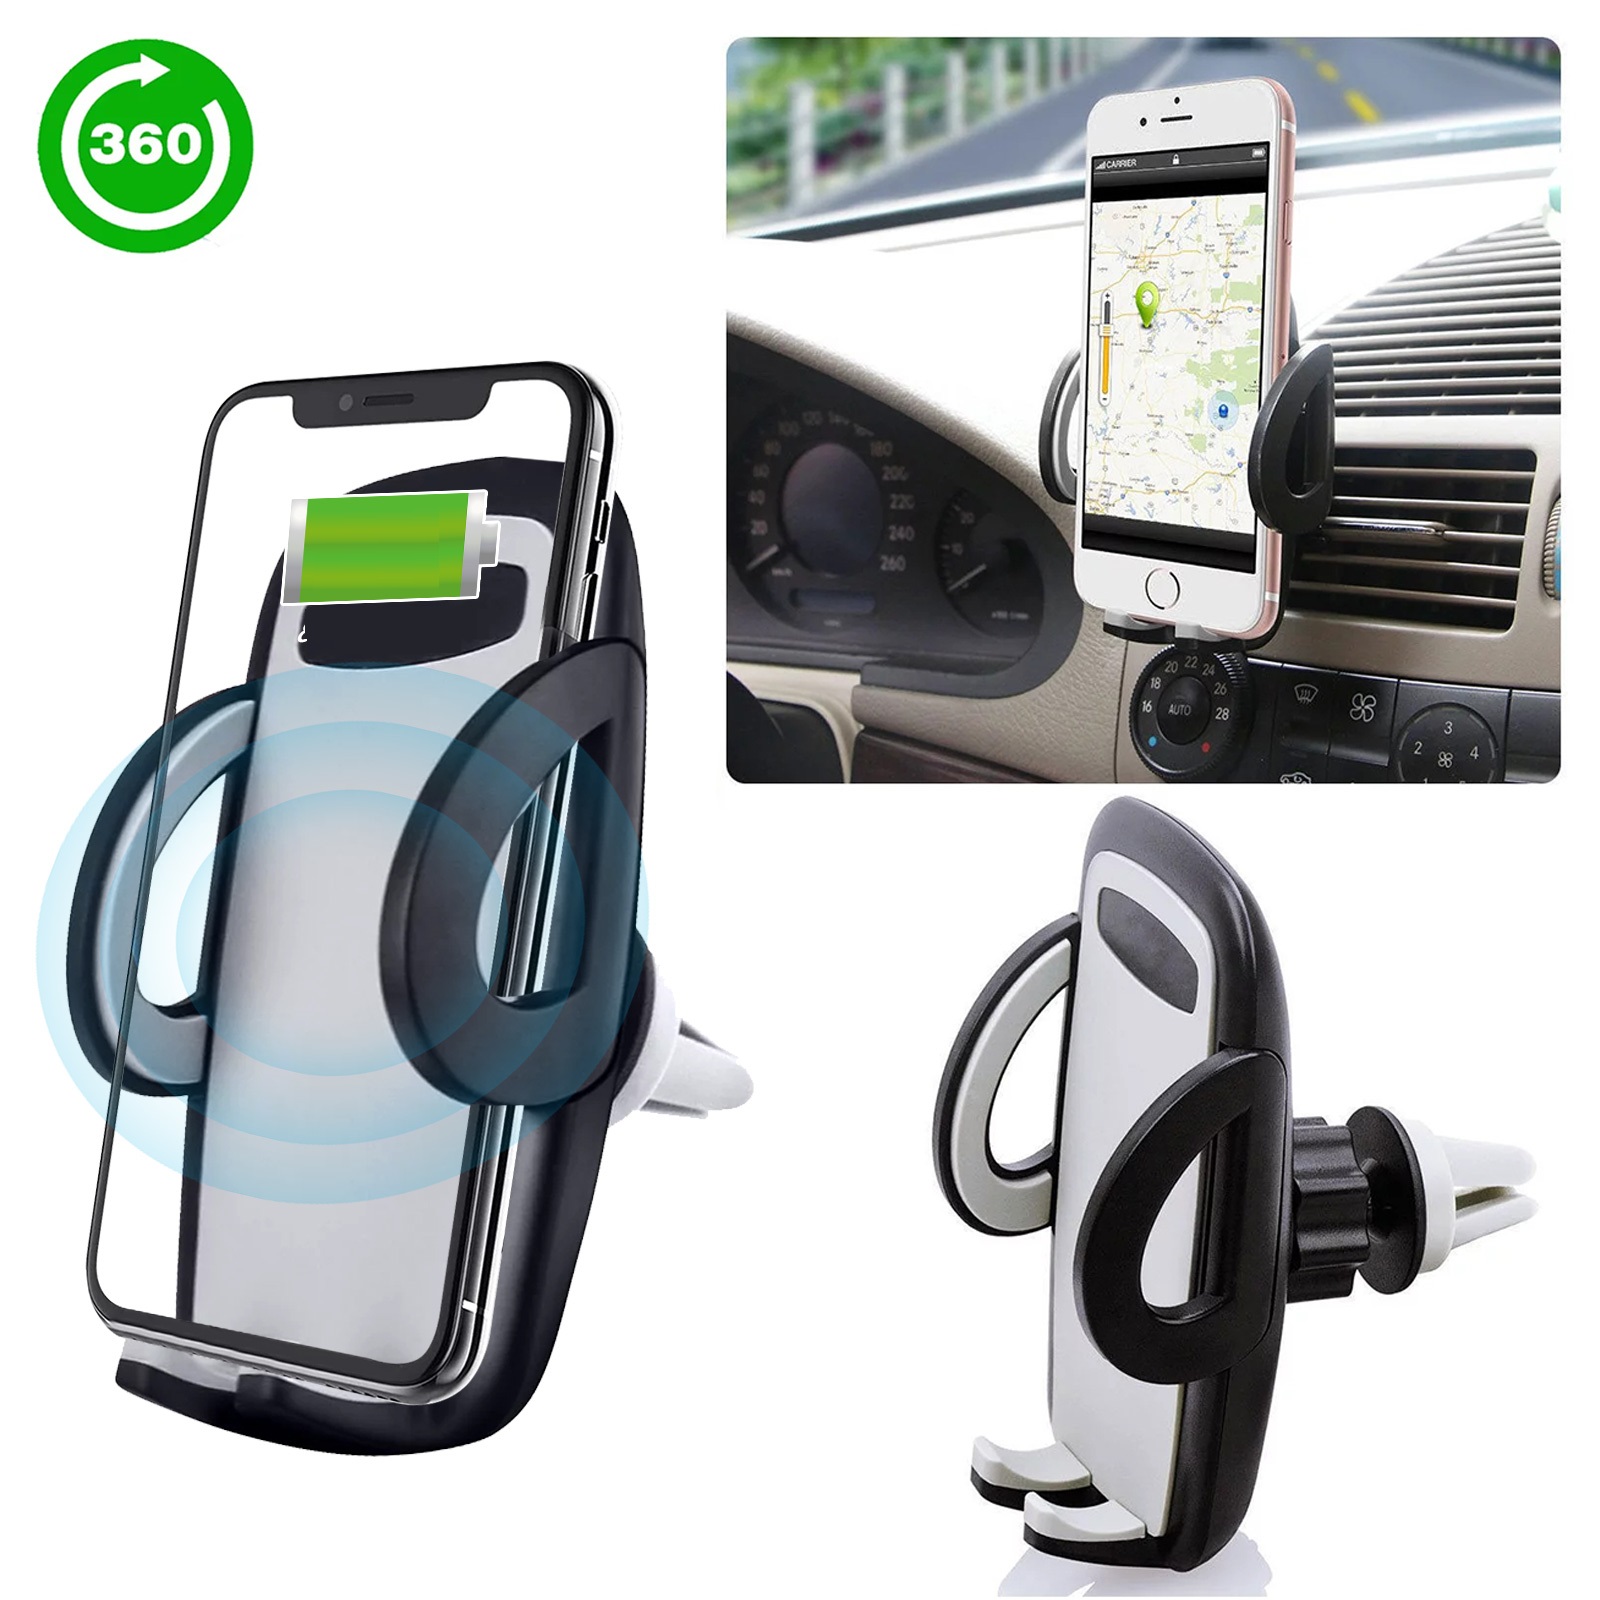 Car Mount, Air Vent Car Holder, Car Phone Mount Fit for iPhone 13, 12, 12 Pro, 12 Pro Max, 11 XS X 8, Android Cell Phones, Phone Holder for Car, Universal Air Vent Mount for Men Women - image 1 of 9